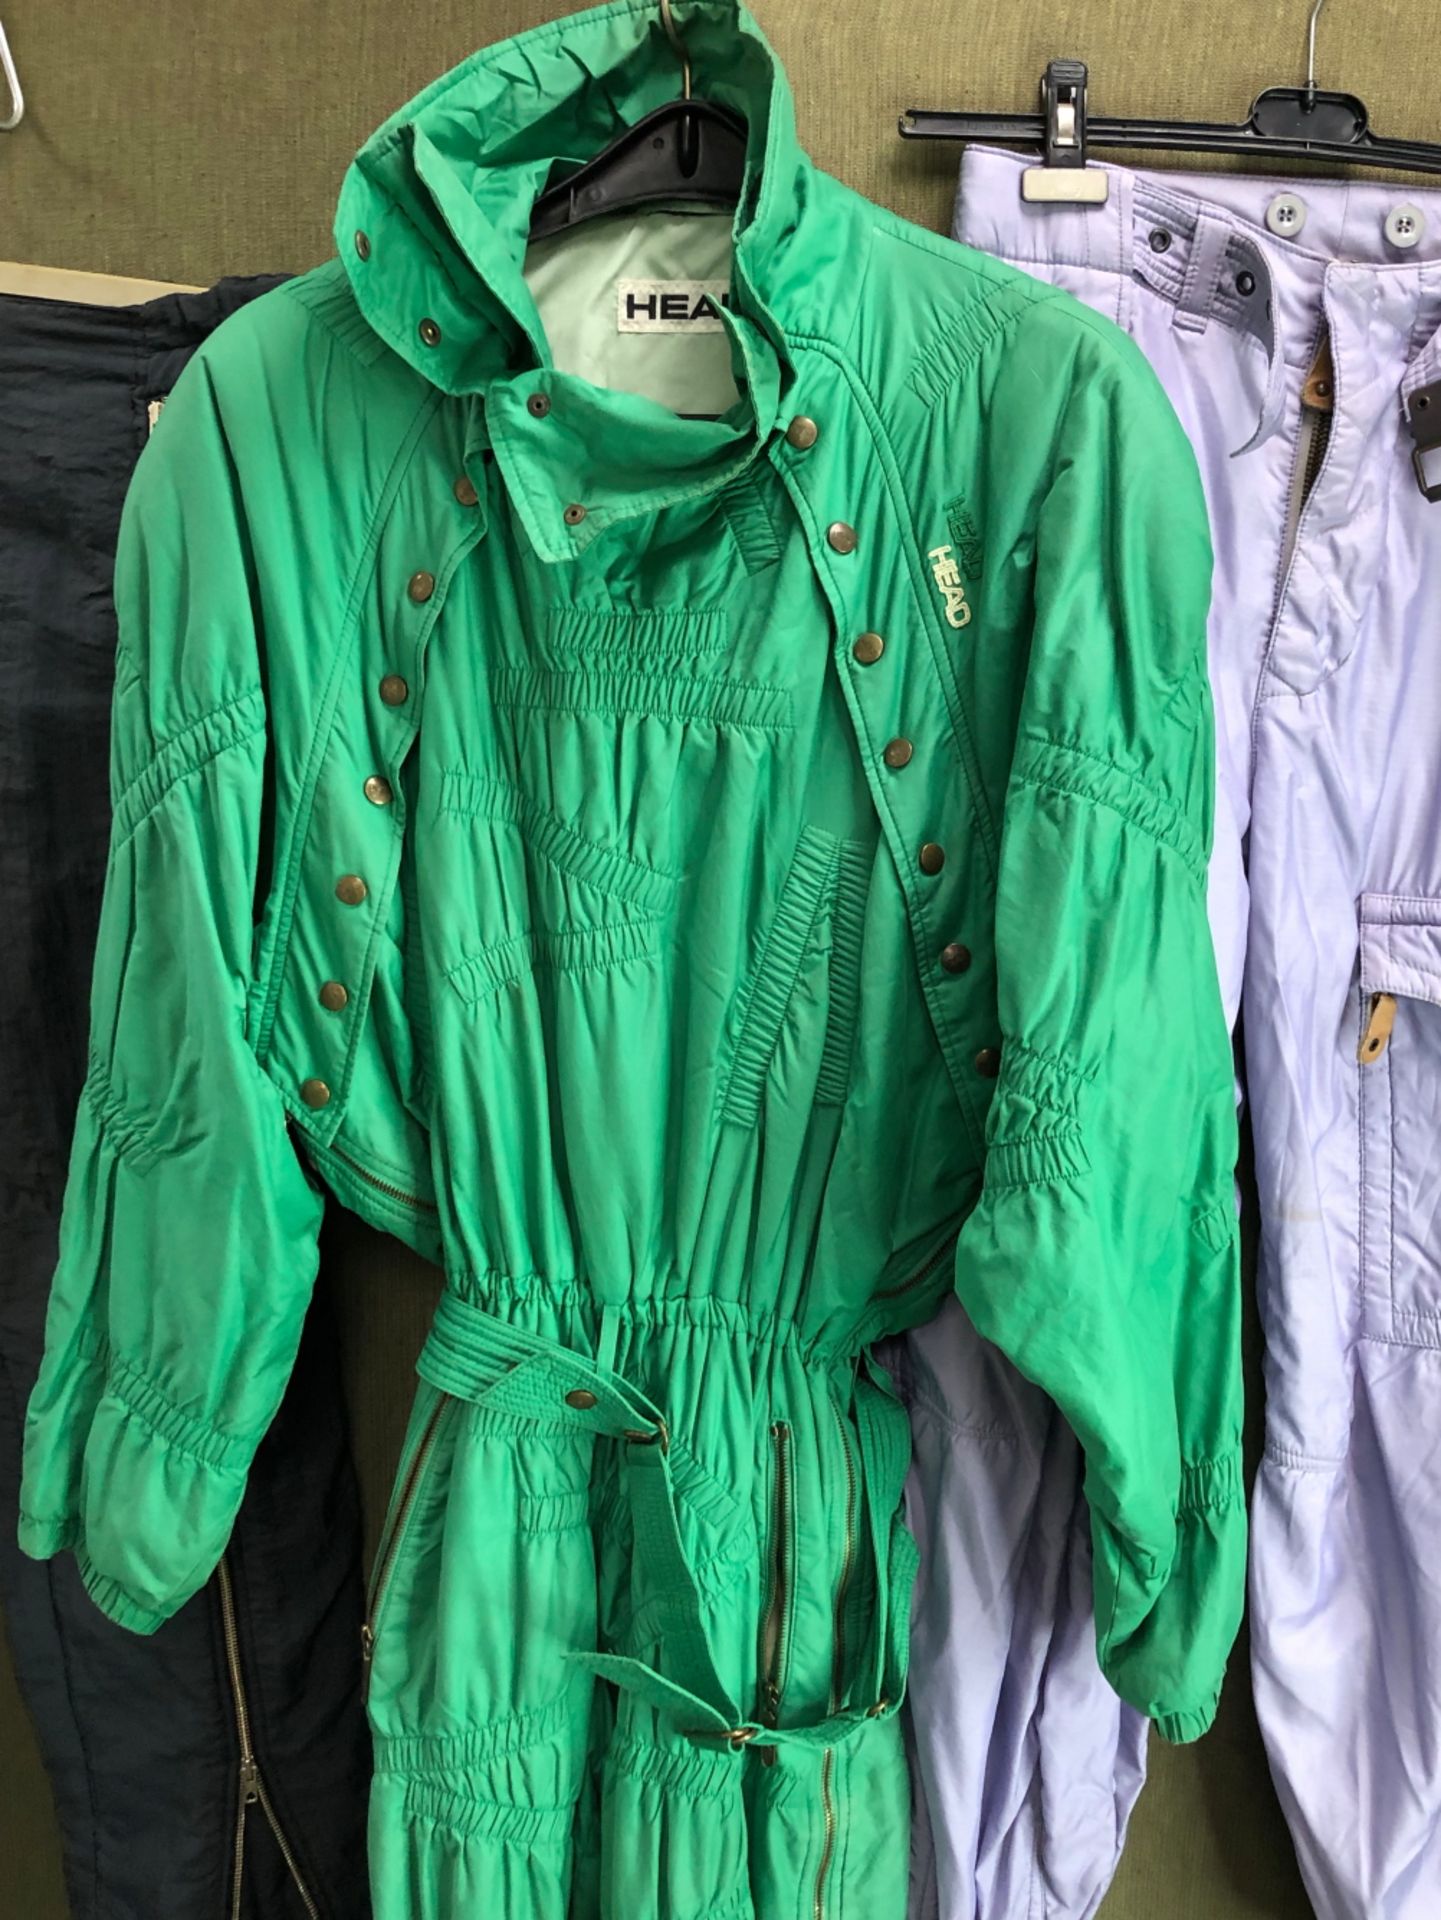 SKI WEAR. A HEAD BRANDED GREEN SKI SUIT, SIZE 38R, ELLESSE TROUSERS AND MATCHING TOP FRENCH SIZE - Image 2 of 22